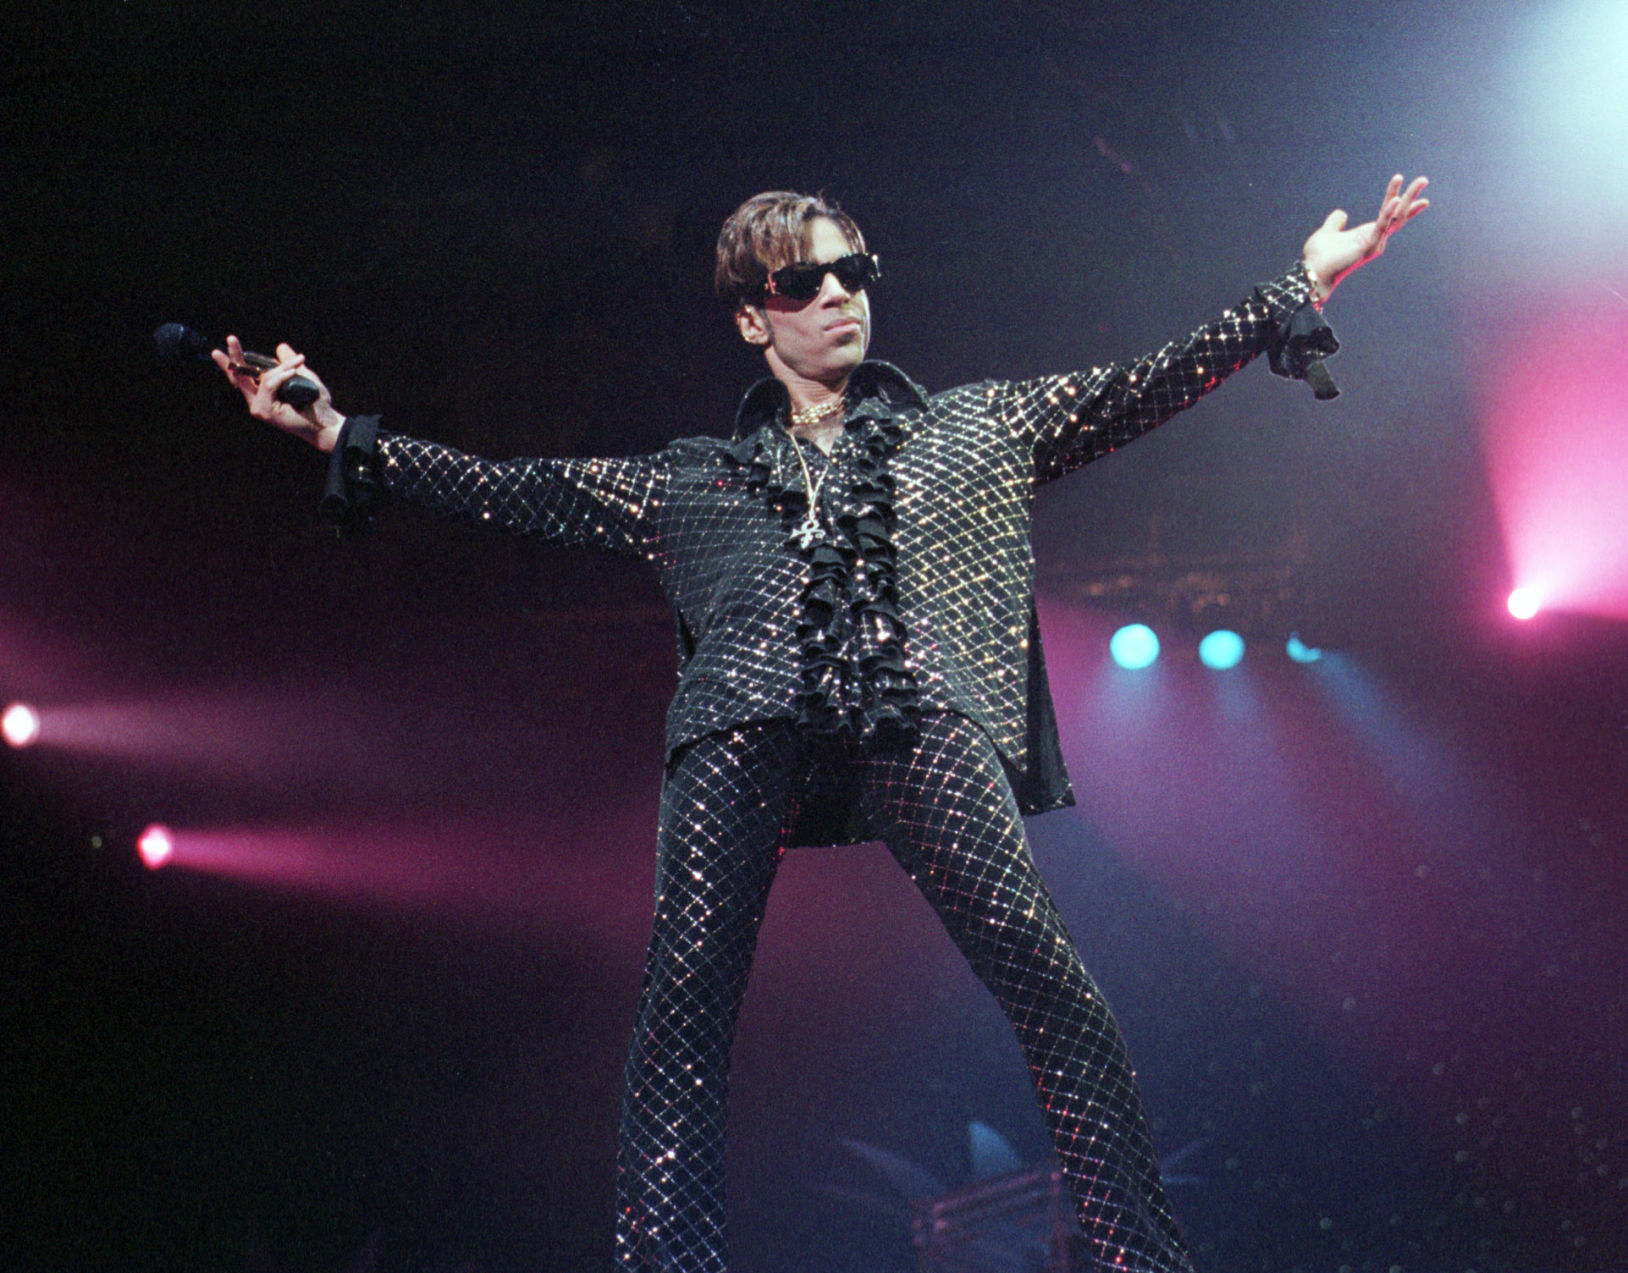 2001 concert review: Prince celebrates his career with thrilled 